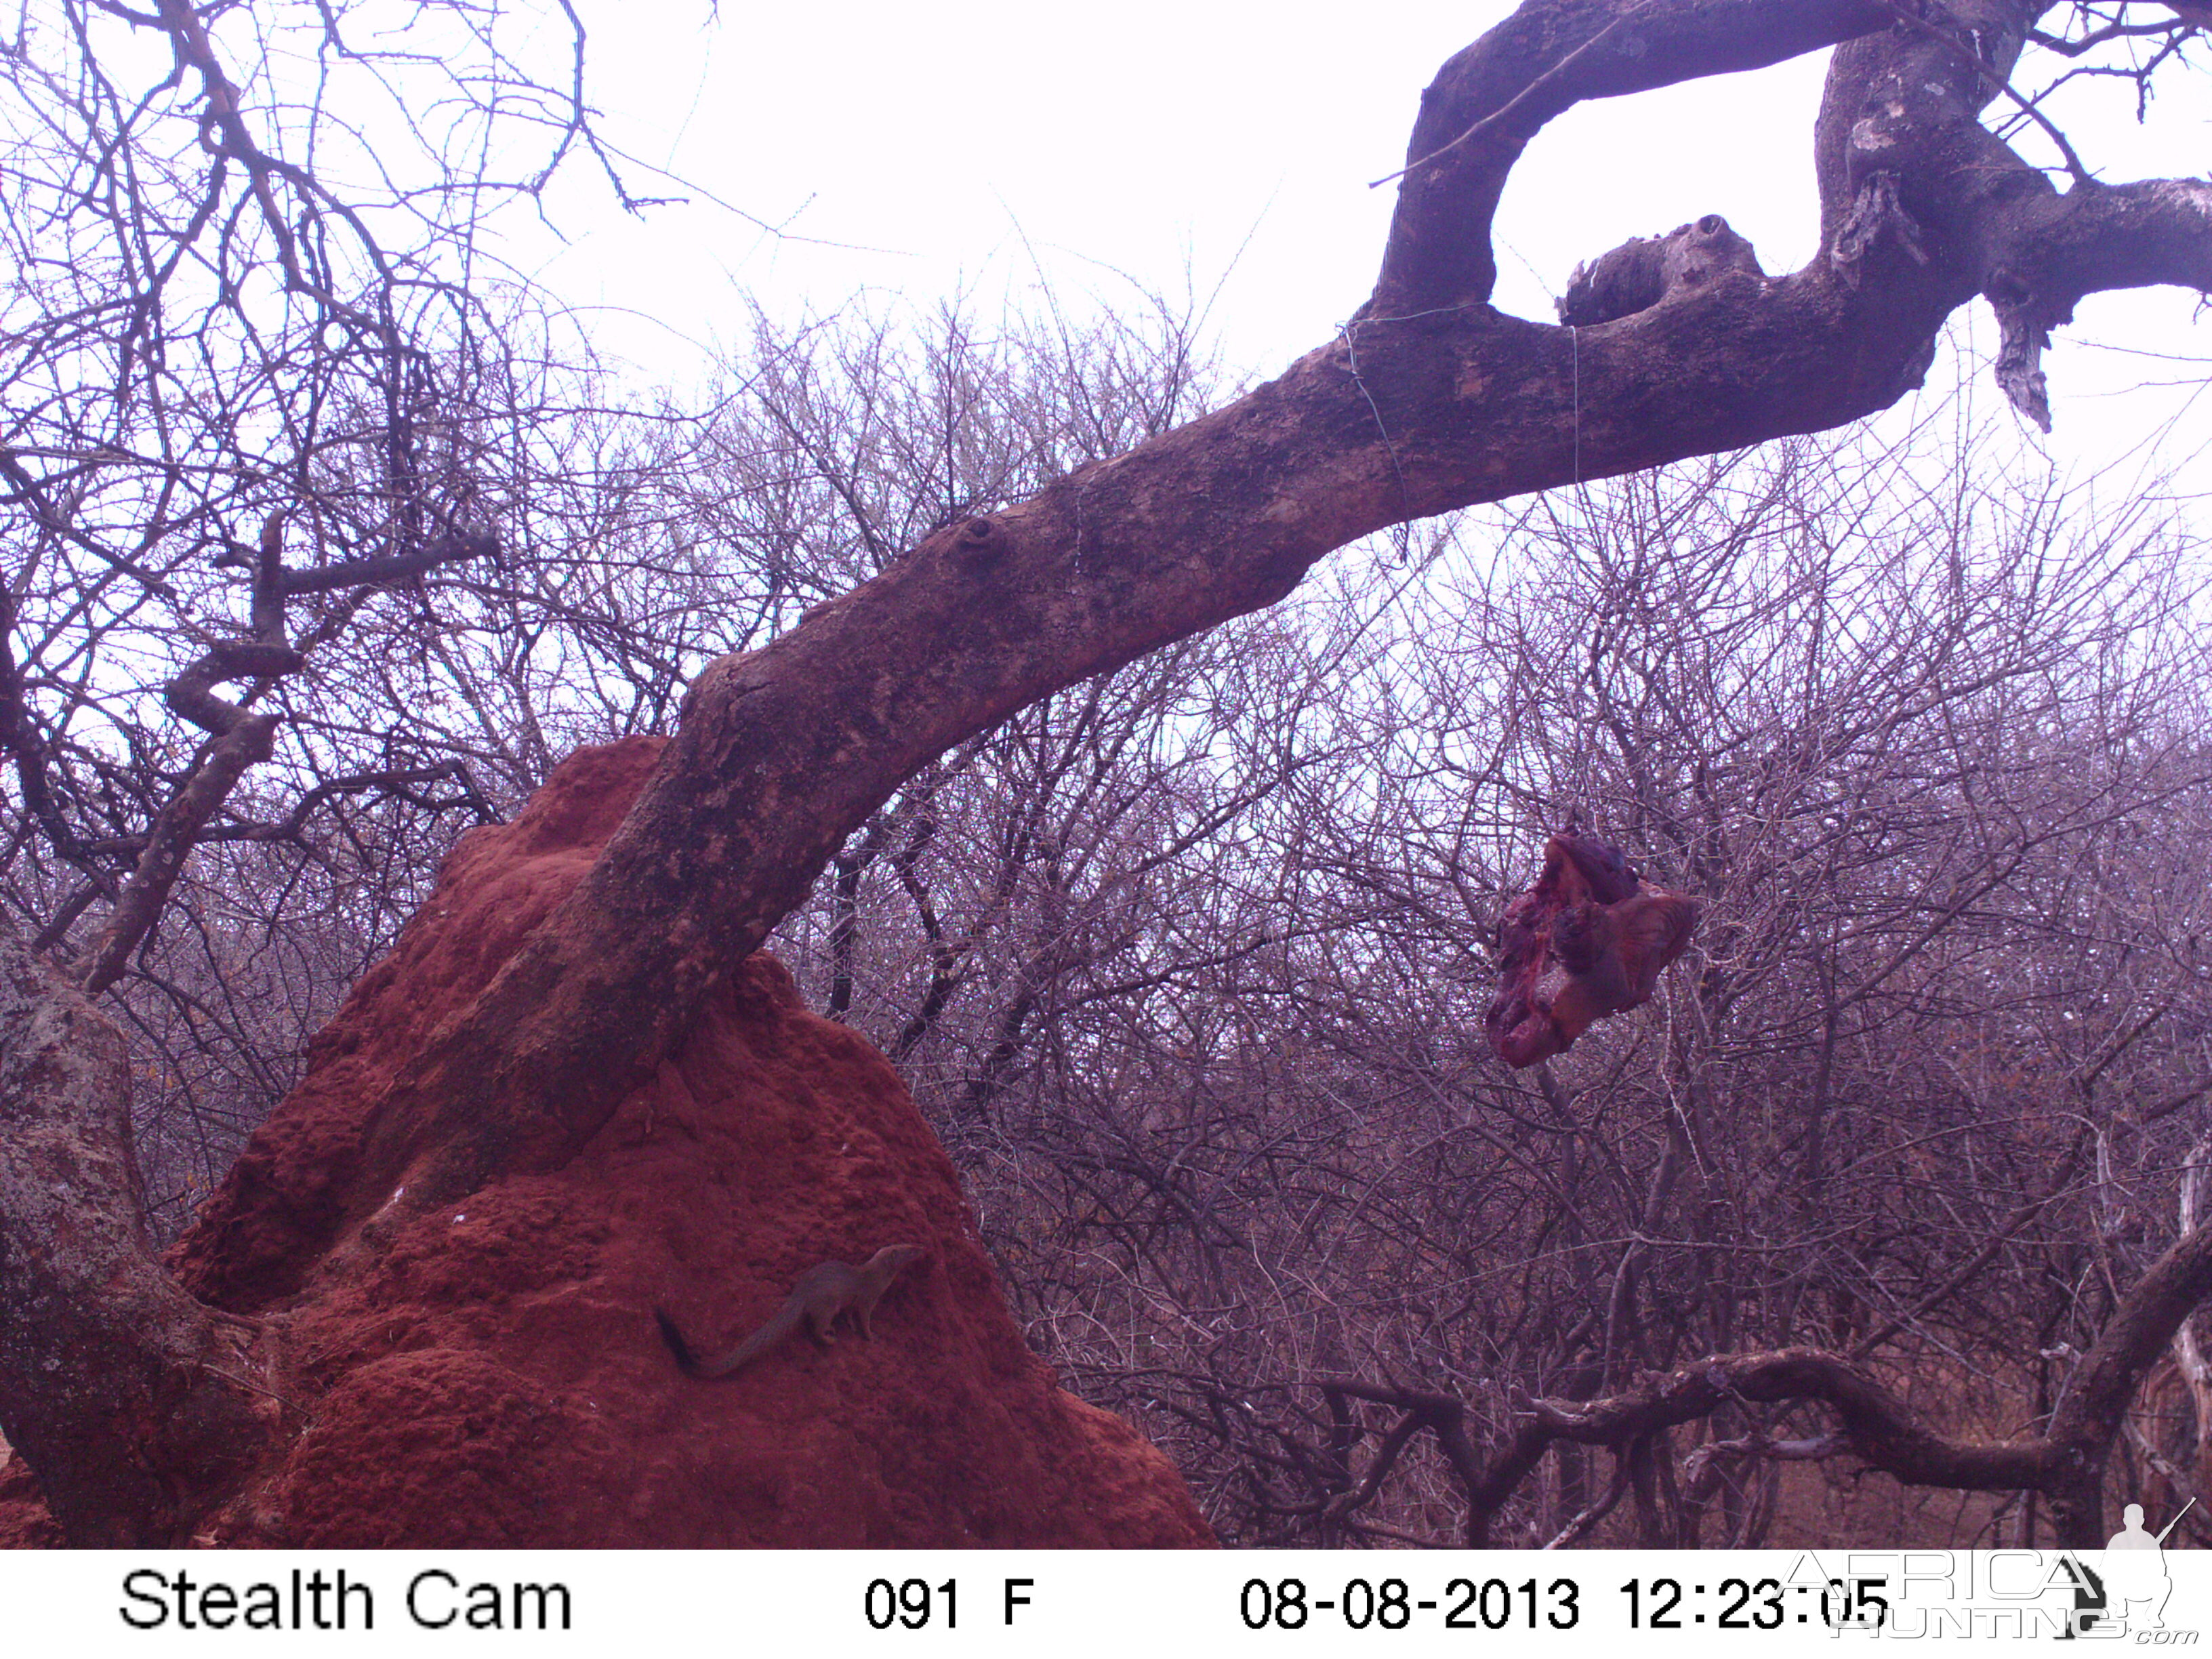 Red Mongoose Trail Camera